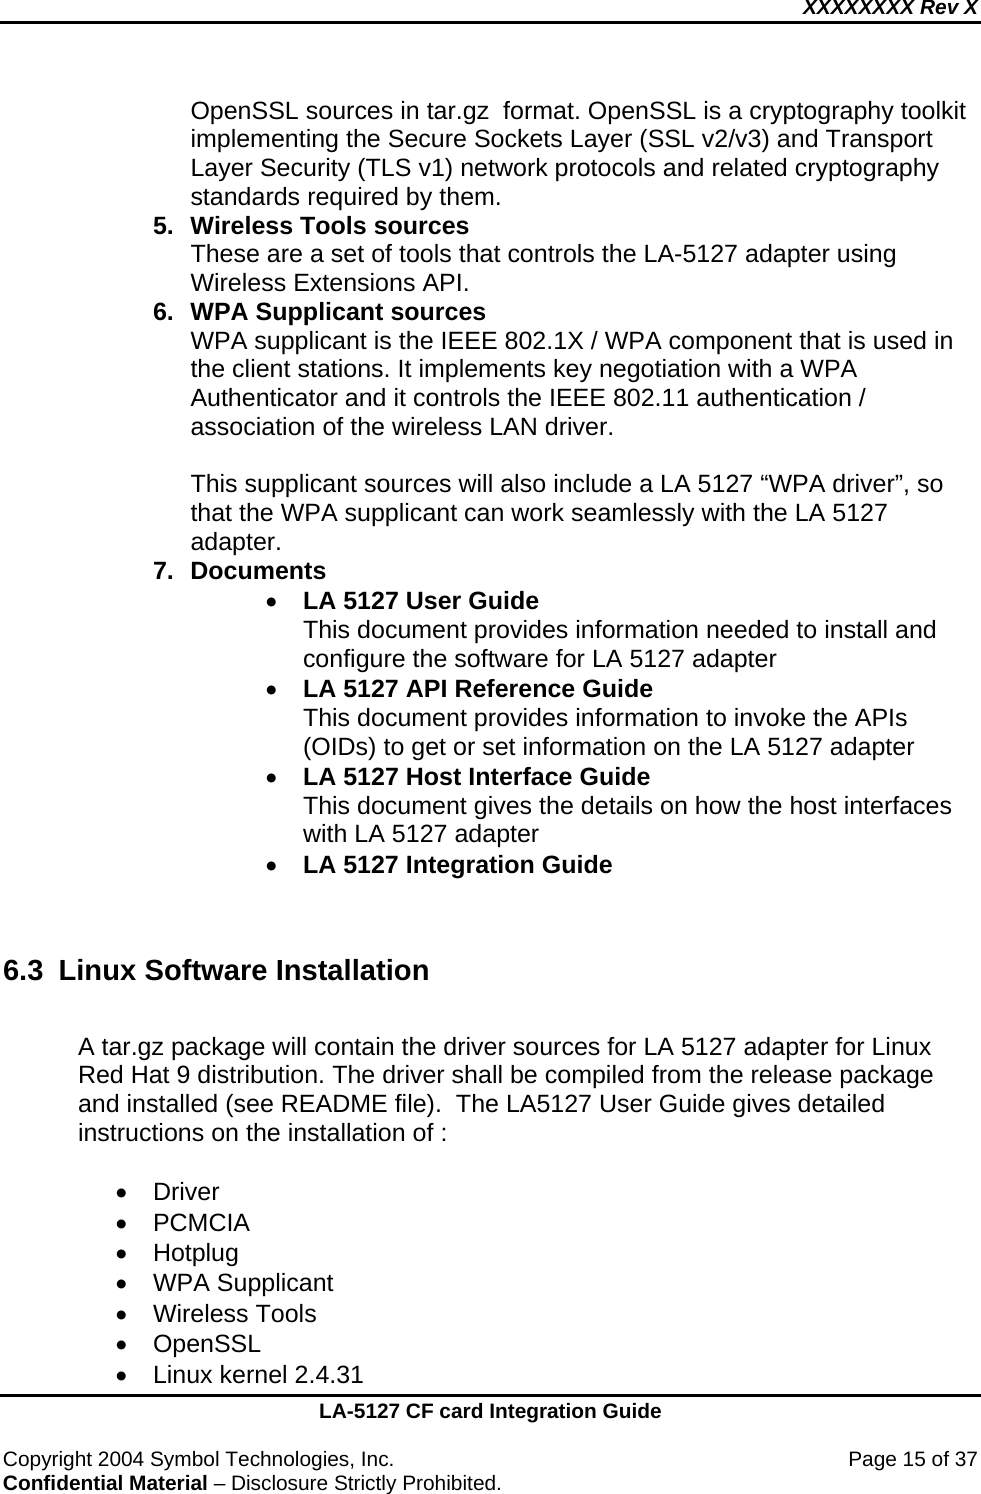 XXXXXXXX Rev X    LA-5127 CF card Integration Guide  Copyright 2004 Symbol Technologies, Inc.    Page 15 of 37 Confidential Material – Disclosure Strictly Prohibited. OpenSSL sources in tar.gz  format. OpenSSL is a cryptography toolkit implementing the Secure Sockets Layer (SSL v2/v3) and Transport Layer Security (TLS v1) network protocols and related cryptography standards required by them. 5.  Wireless Tools sources These are a set of tools that controls the LA-5127 adapter using   Wireless Extensions API. 6.  WPA Supplicant sources WPA supplicant is the IEEE 802.1X / WPA component that is used in the client stations. It implements key negotiation with a WPA Authenticator and it controls the IEEE 802.11 authentication / association of the wireless LAN driver.  This supplicant sources will also include a LA 5127 “WPA driver”, so that the WPA supplicant can work seamlessly with the LA 5127 adapter. 7. Documents • LA 5127 User Guide This document provides information needed to install and configure the software for LA 5127 adapter • LA 5127 API Reference Guide This document provides information to invoke the APIs (OIDs) to get or set information on the LA 5127 adapter • LA 5127 Host Interface Guide This document gives the details on how the host interfaces with LA 5127 adapter • LA 5127 Integration Guide    6.3 Linux Software Installation  A tar.gz package will contain the driver sources for LA 5127 adapter for Linux Red Hat 9 distribution. The driver shall be compiled from the release package and installed (see README file).  The LA5127 User Guide gives detailed instructions on the installation of :  • Driver  • PCMCIA • Hotplug  •  WPA Supplicant  • Wireless Tools • OpenSSL •  Linux kernel 2.4.31 